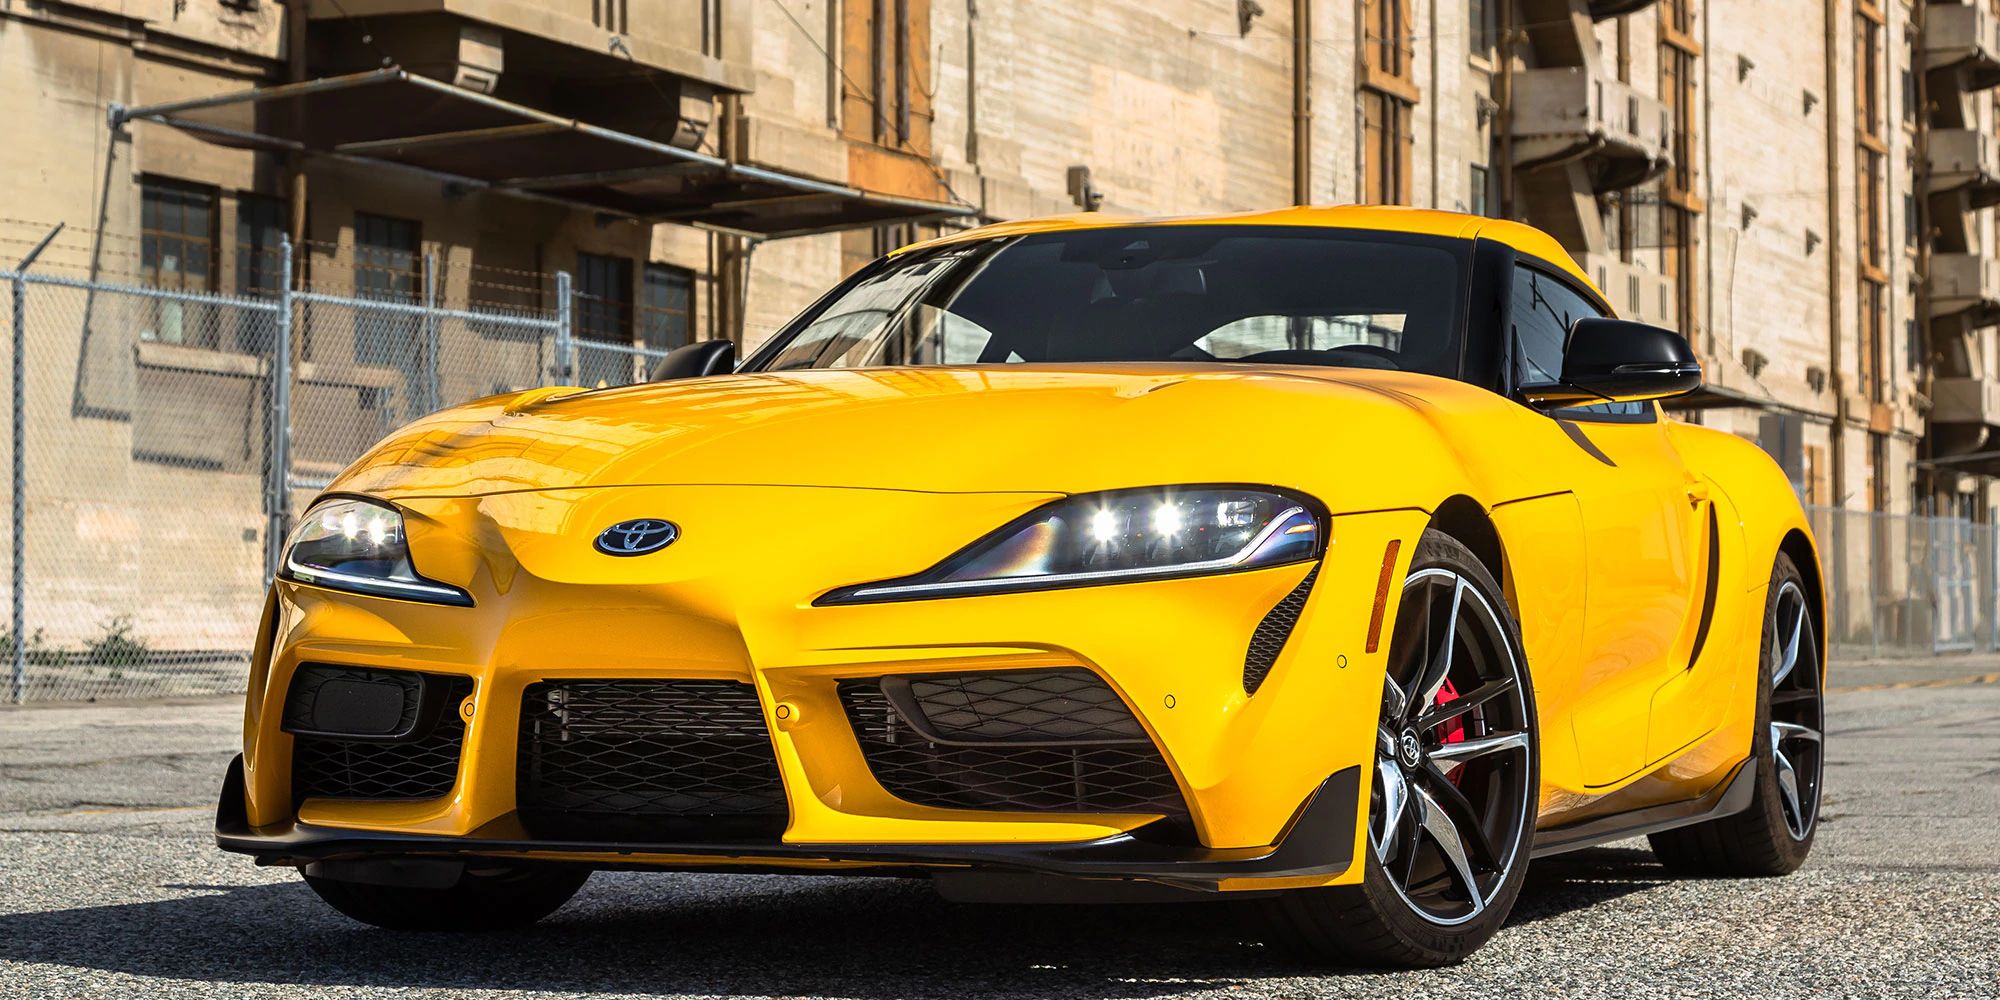 The front of a yellow Supra